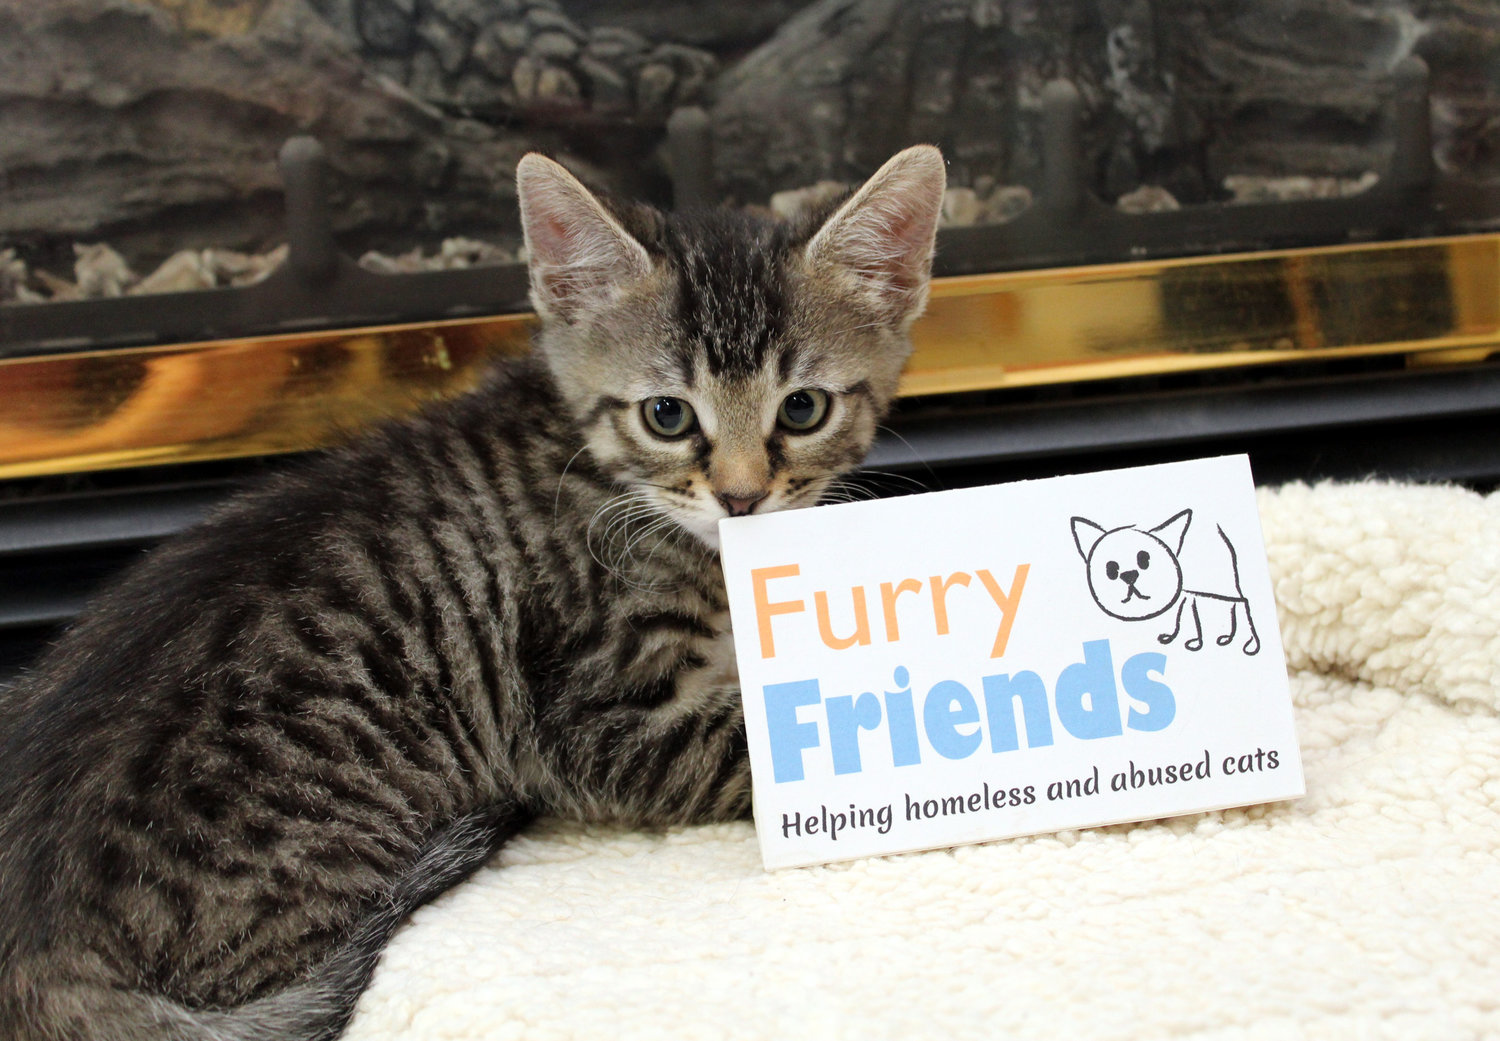 Hugo the cat holds a sign for Furry Friends.